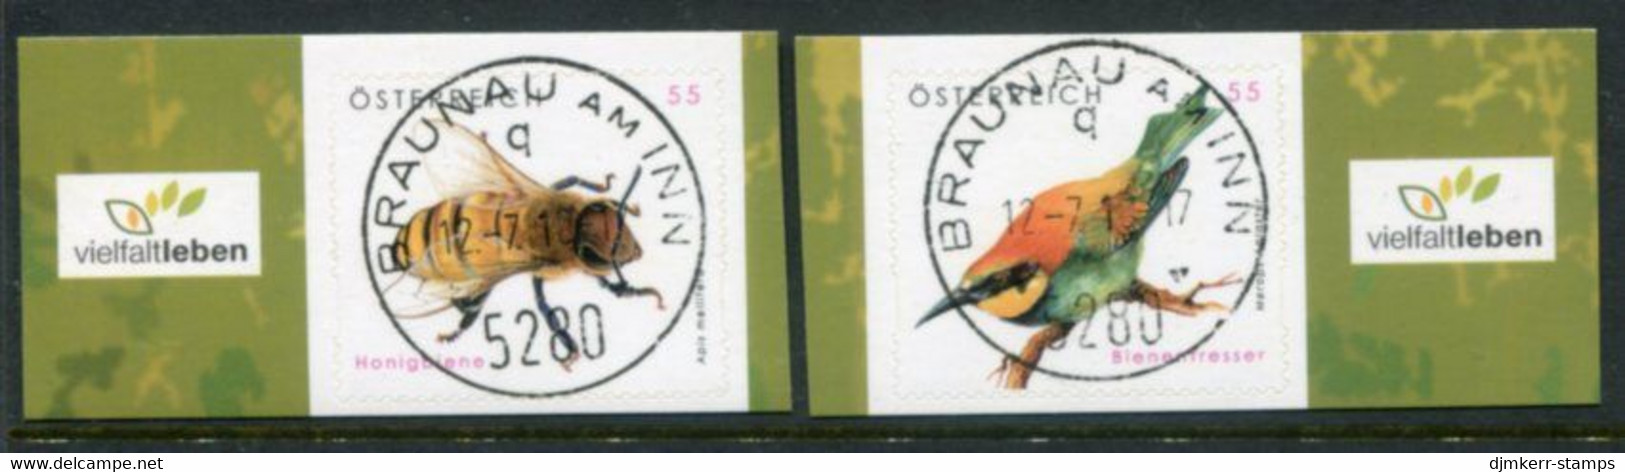 AUSTRIA  2009 Fauna Self-adhesive Definitives Used.  Michel 2819-20 - Used Stamps